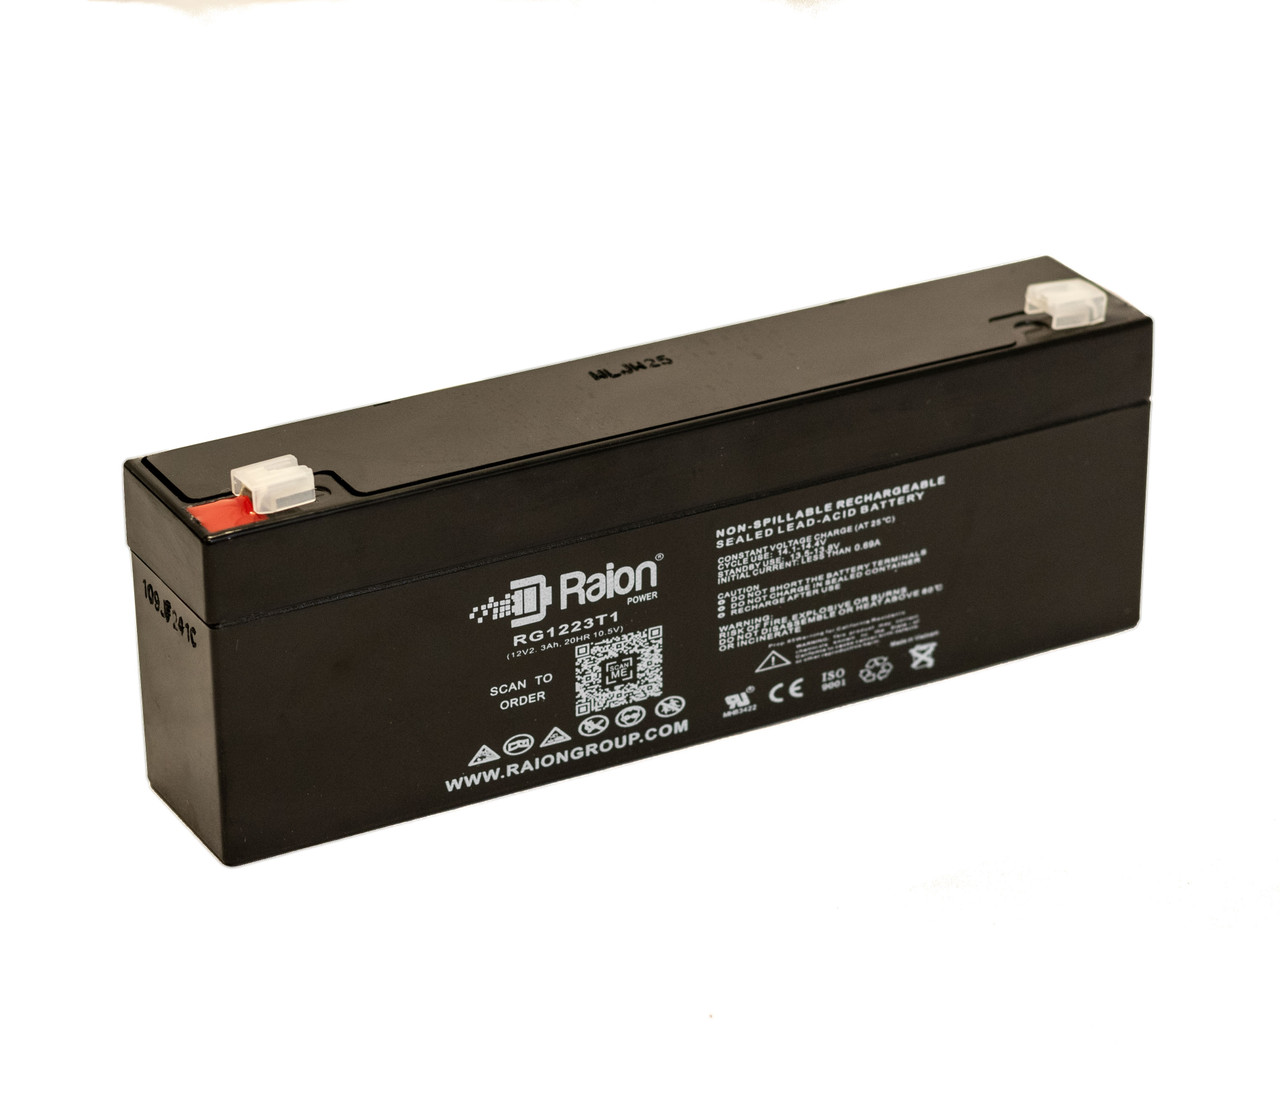 Raion Power RG1223T1 Replacement Battery for Peak PK12V2.6F1